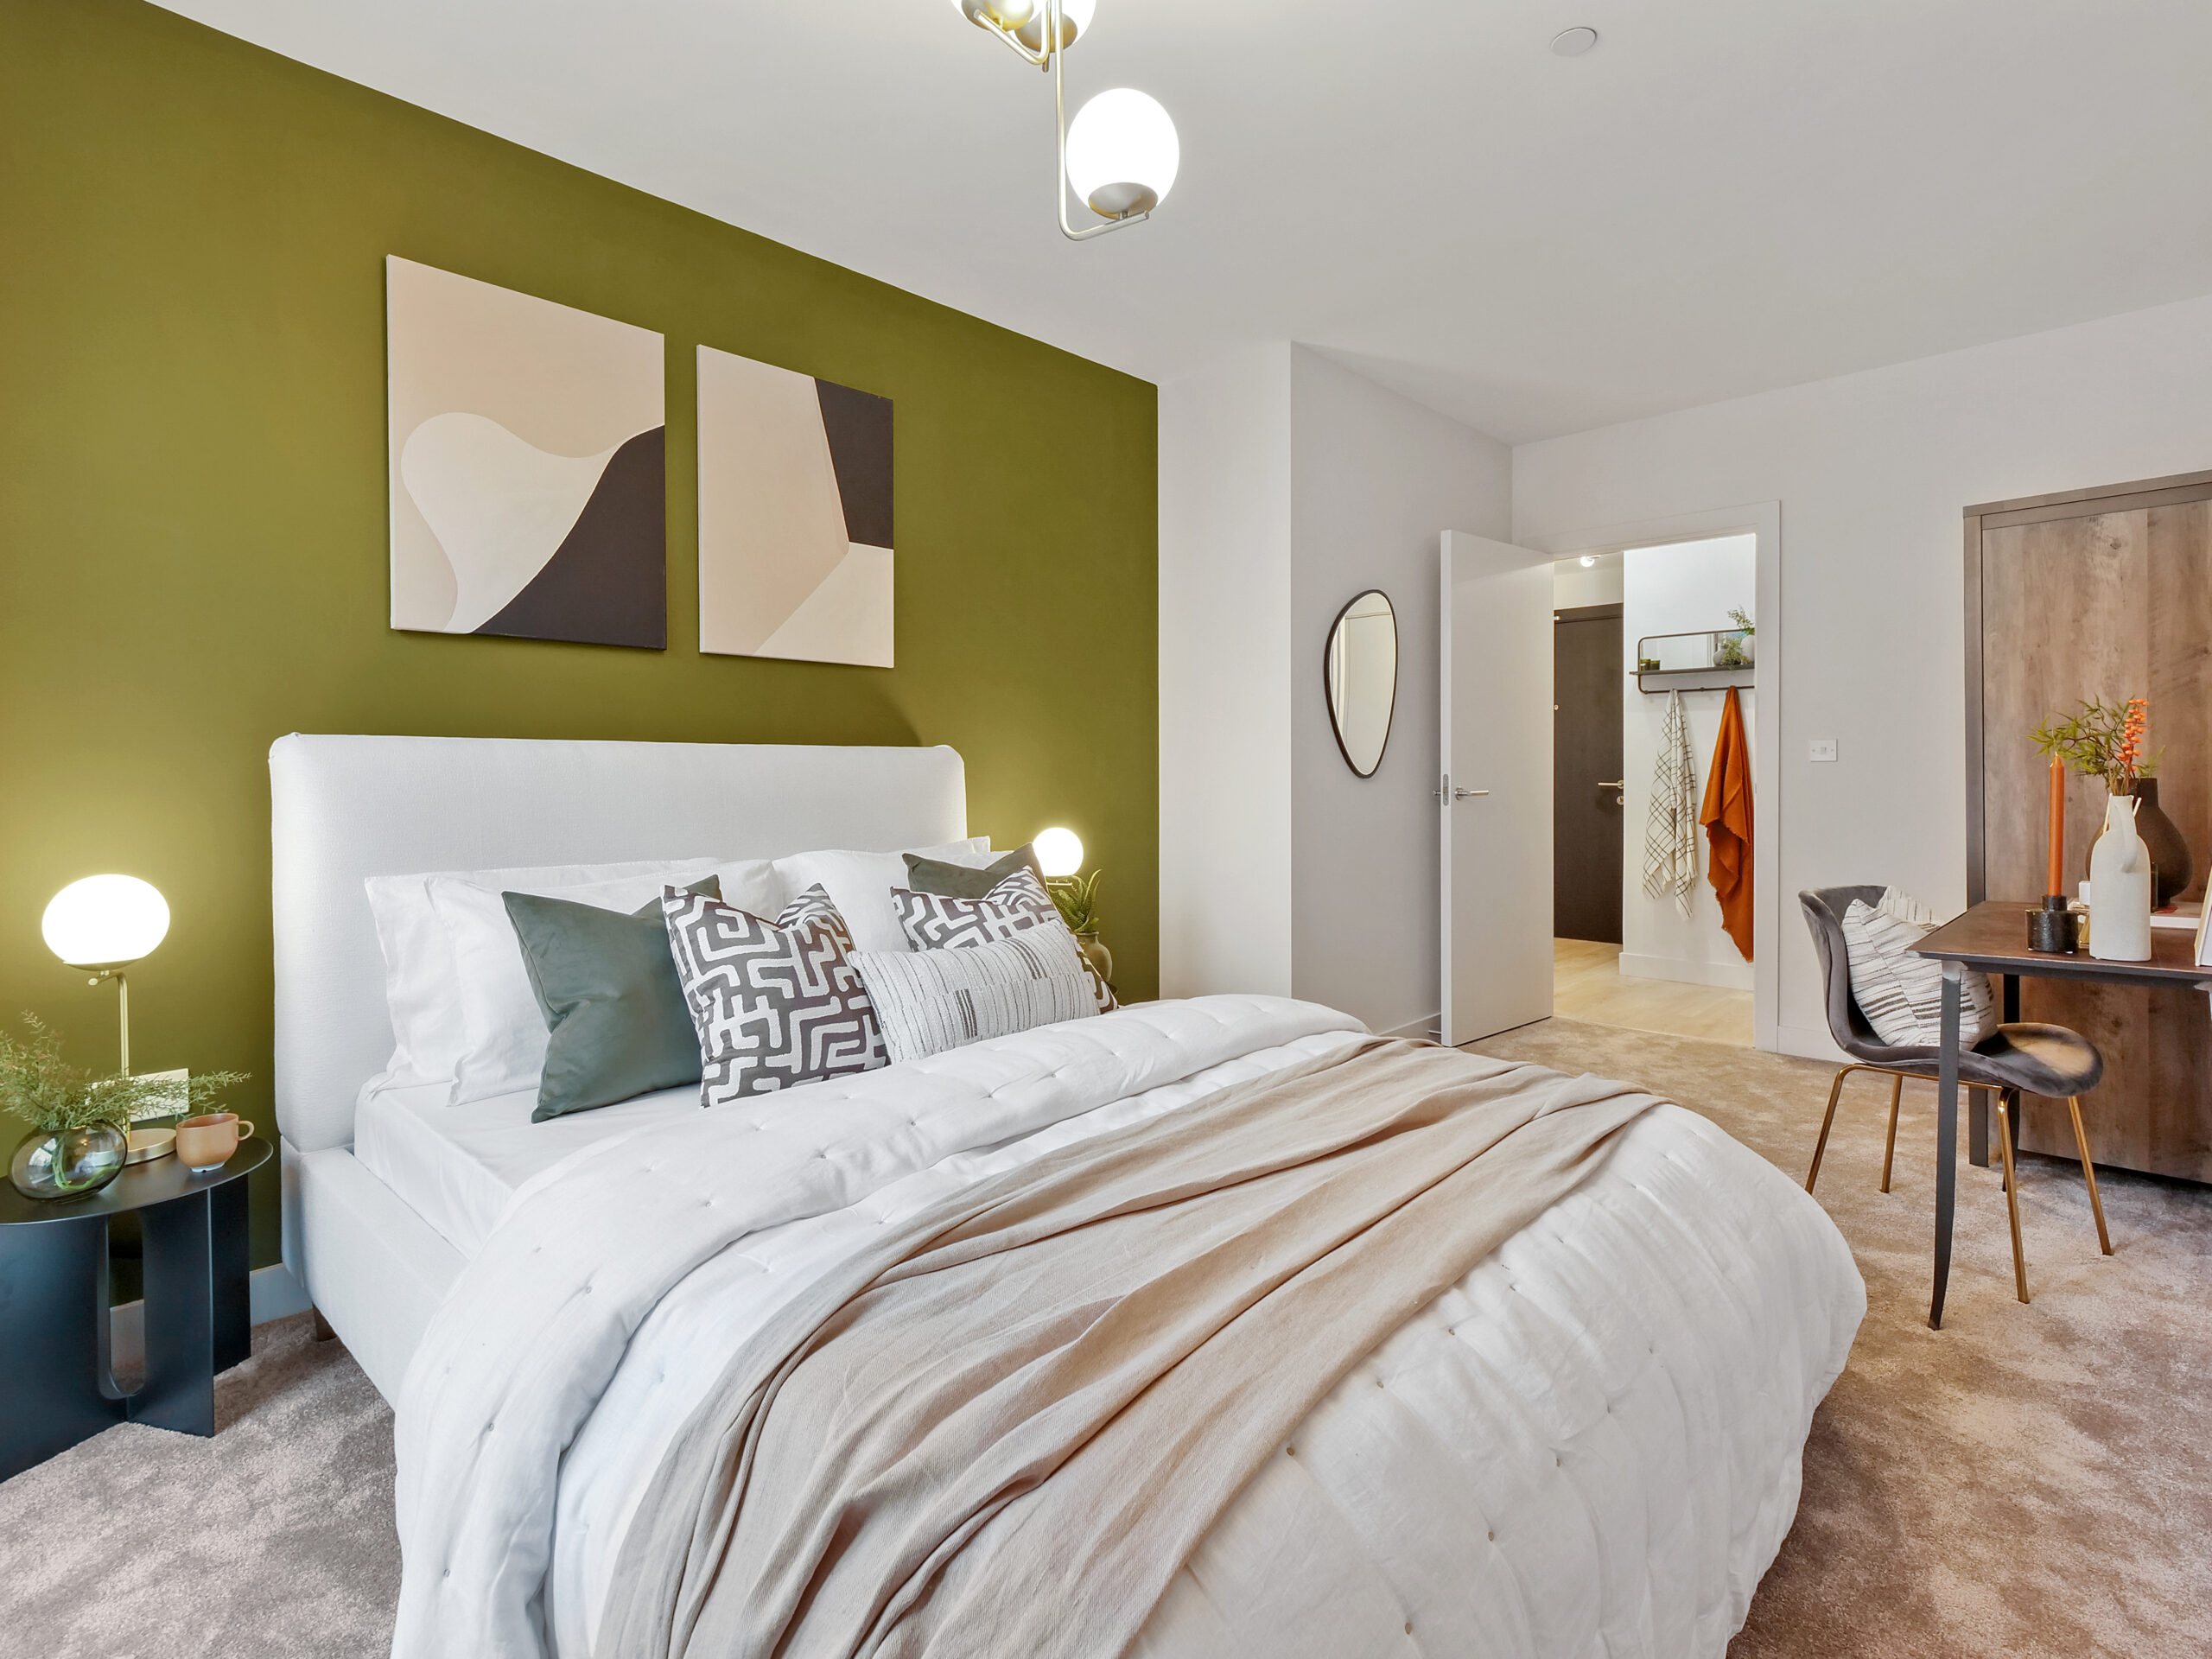 Bedroom interior at Notting Hill Genesis's Heron Quarter at Woodberry Down development - available to purchase through Shared Ownership on Share to Buy!